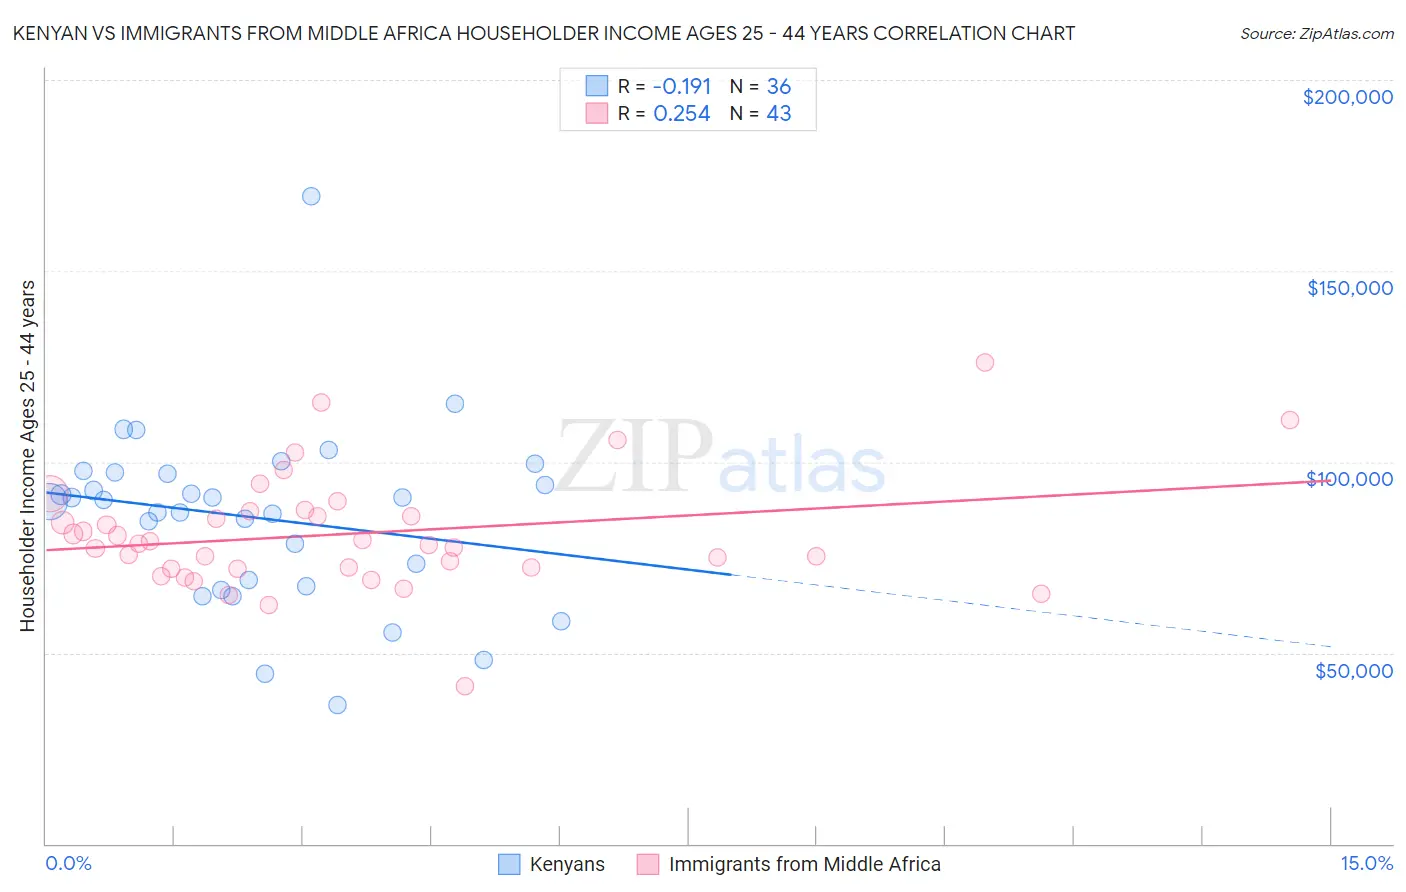 Kenyan vs Immigrants from Middle Africa Householder Income Ages 25 - 44 years